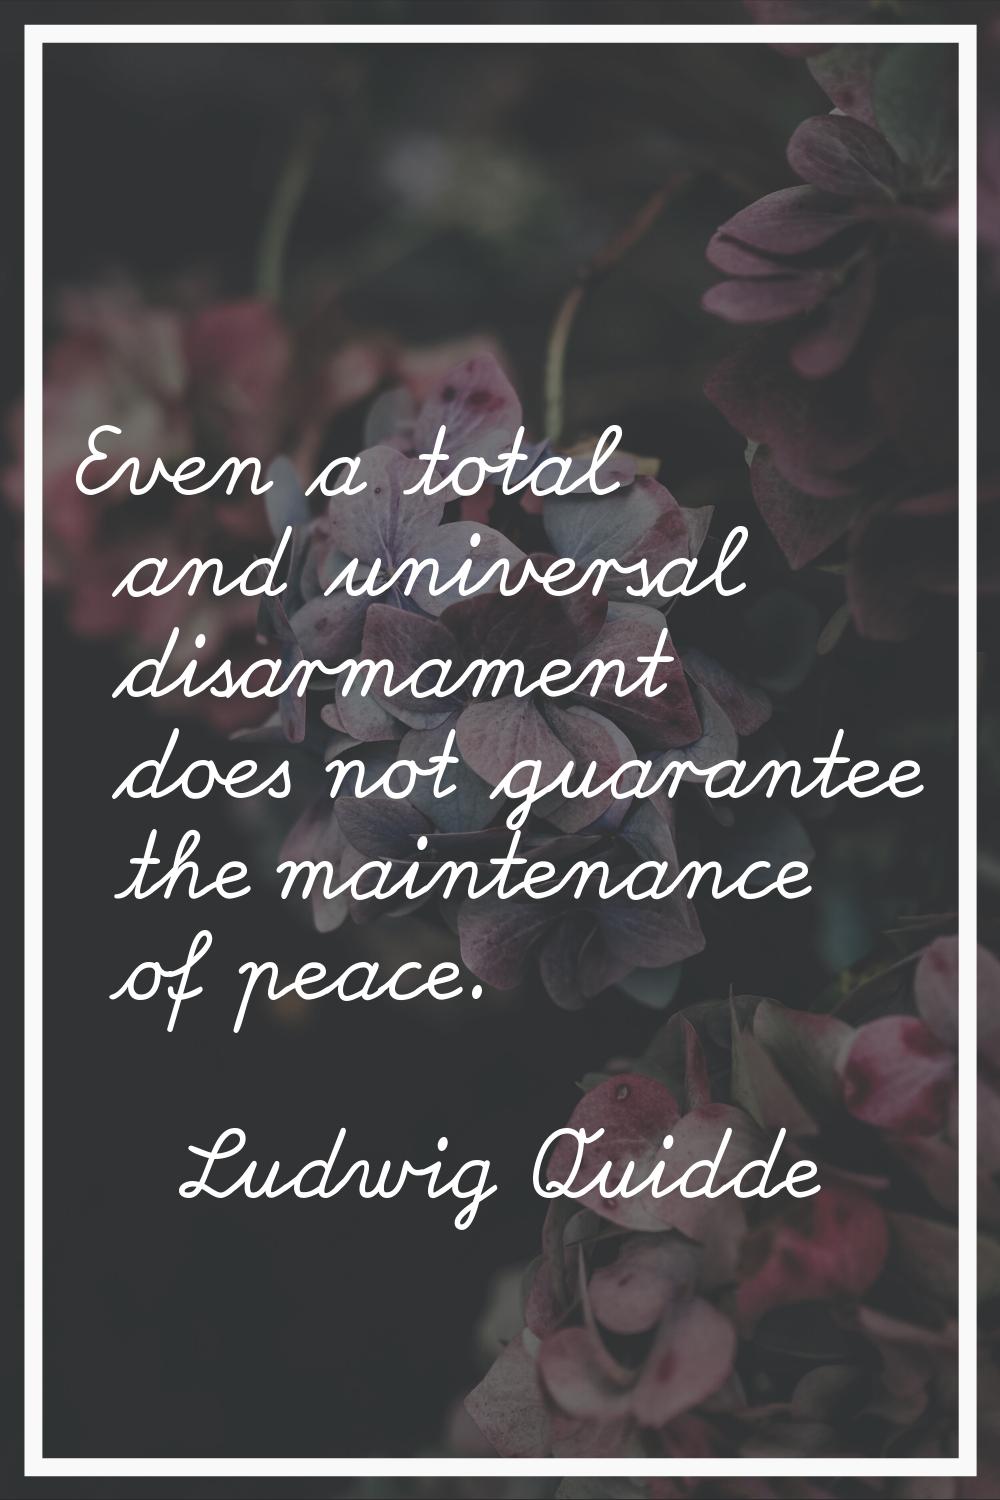 Even a total and universal disarmament does not guarantee the maintenance of peace.